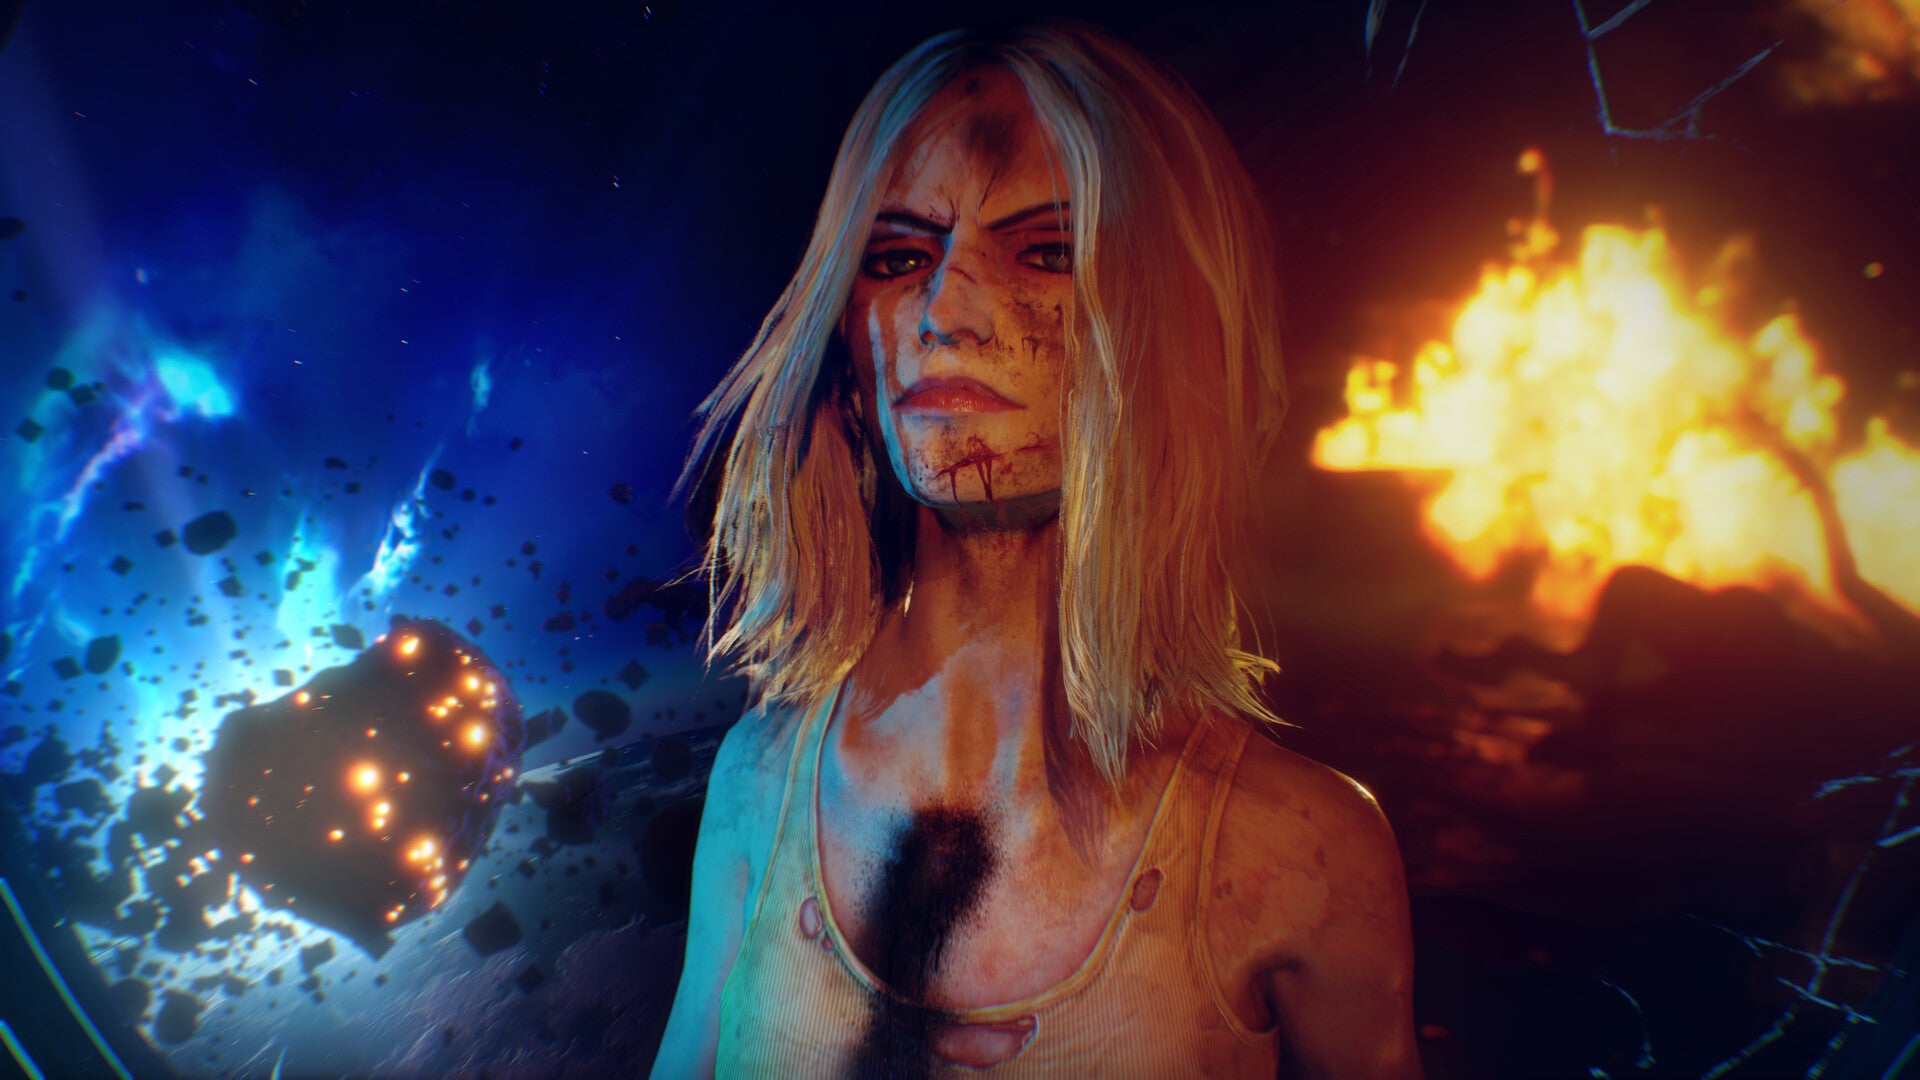 An image of Judas, titular main character of upcoming action RPG from Ghost Story Games. Judas is a blonde white woman covered in bruises and cuts, looking into a mirror as what appears to be an asteroid approaches the burning ship she's standing in